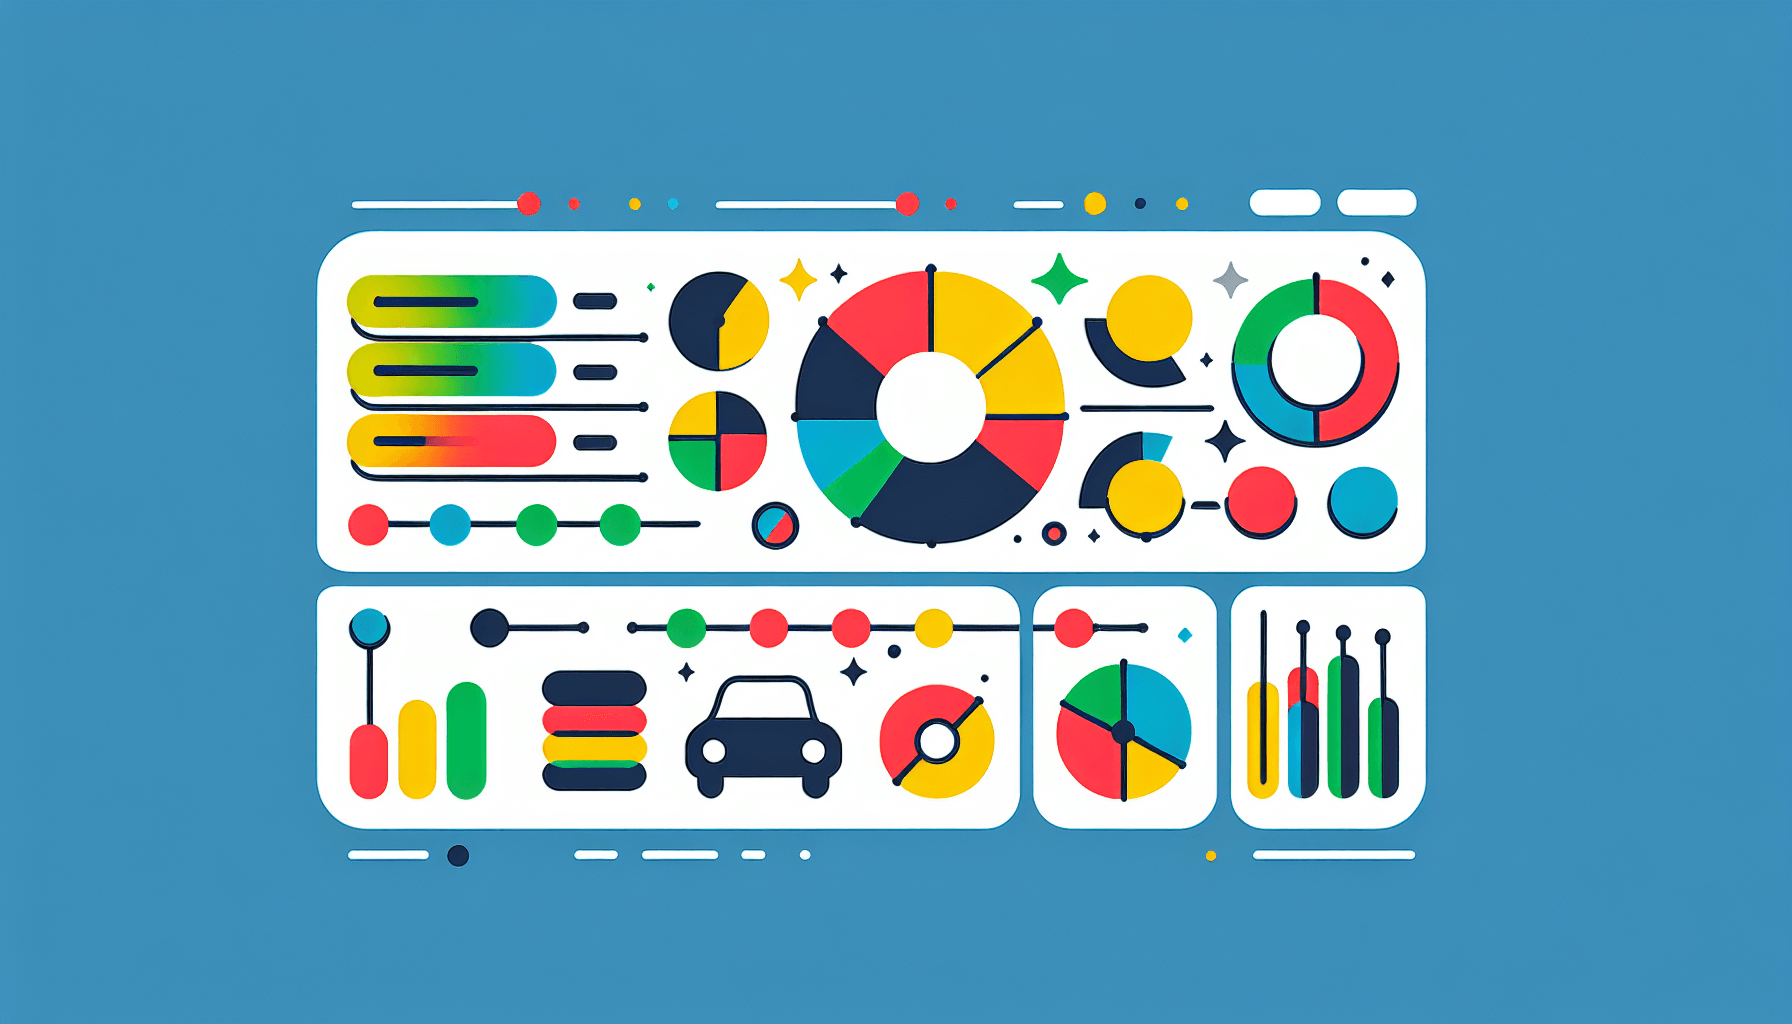 Dashboard in flat illustration style and white background, red #f47574, green #88c7a8, yellow #fcc44b, and blue #645bc8 colors.